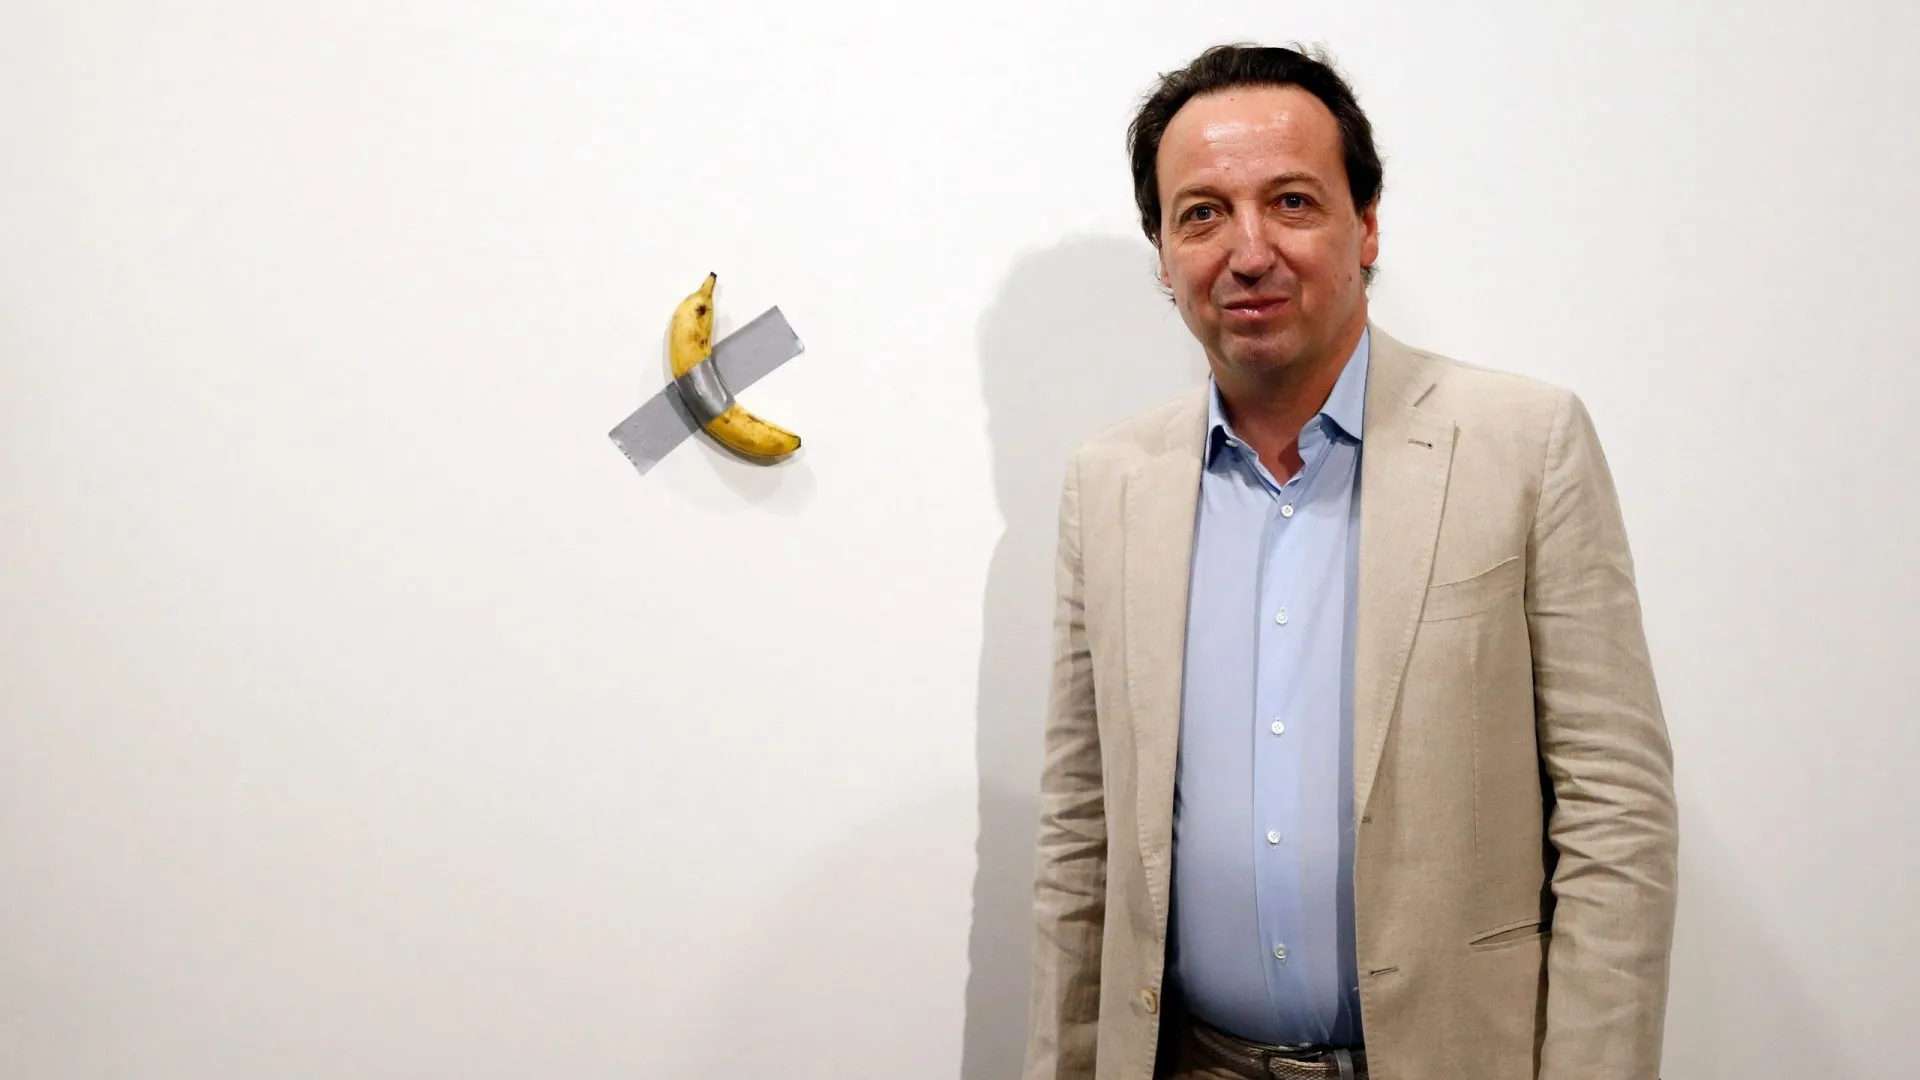 Mandatory Credit: Photo by RHONA WISE/EPA-EFE/Shutterstock (10492891g)Emmanuel Perrotin, founder of the Perrotin Gallery poses with Italian artist Maurizio Cattelan piece's 'Comedian' (a banana duct taped to the wall) during Art Basel in Miami, Florida, USA, 05 December 2019.